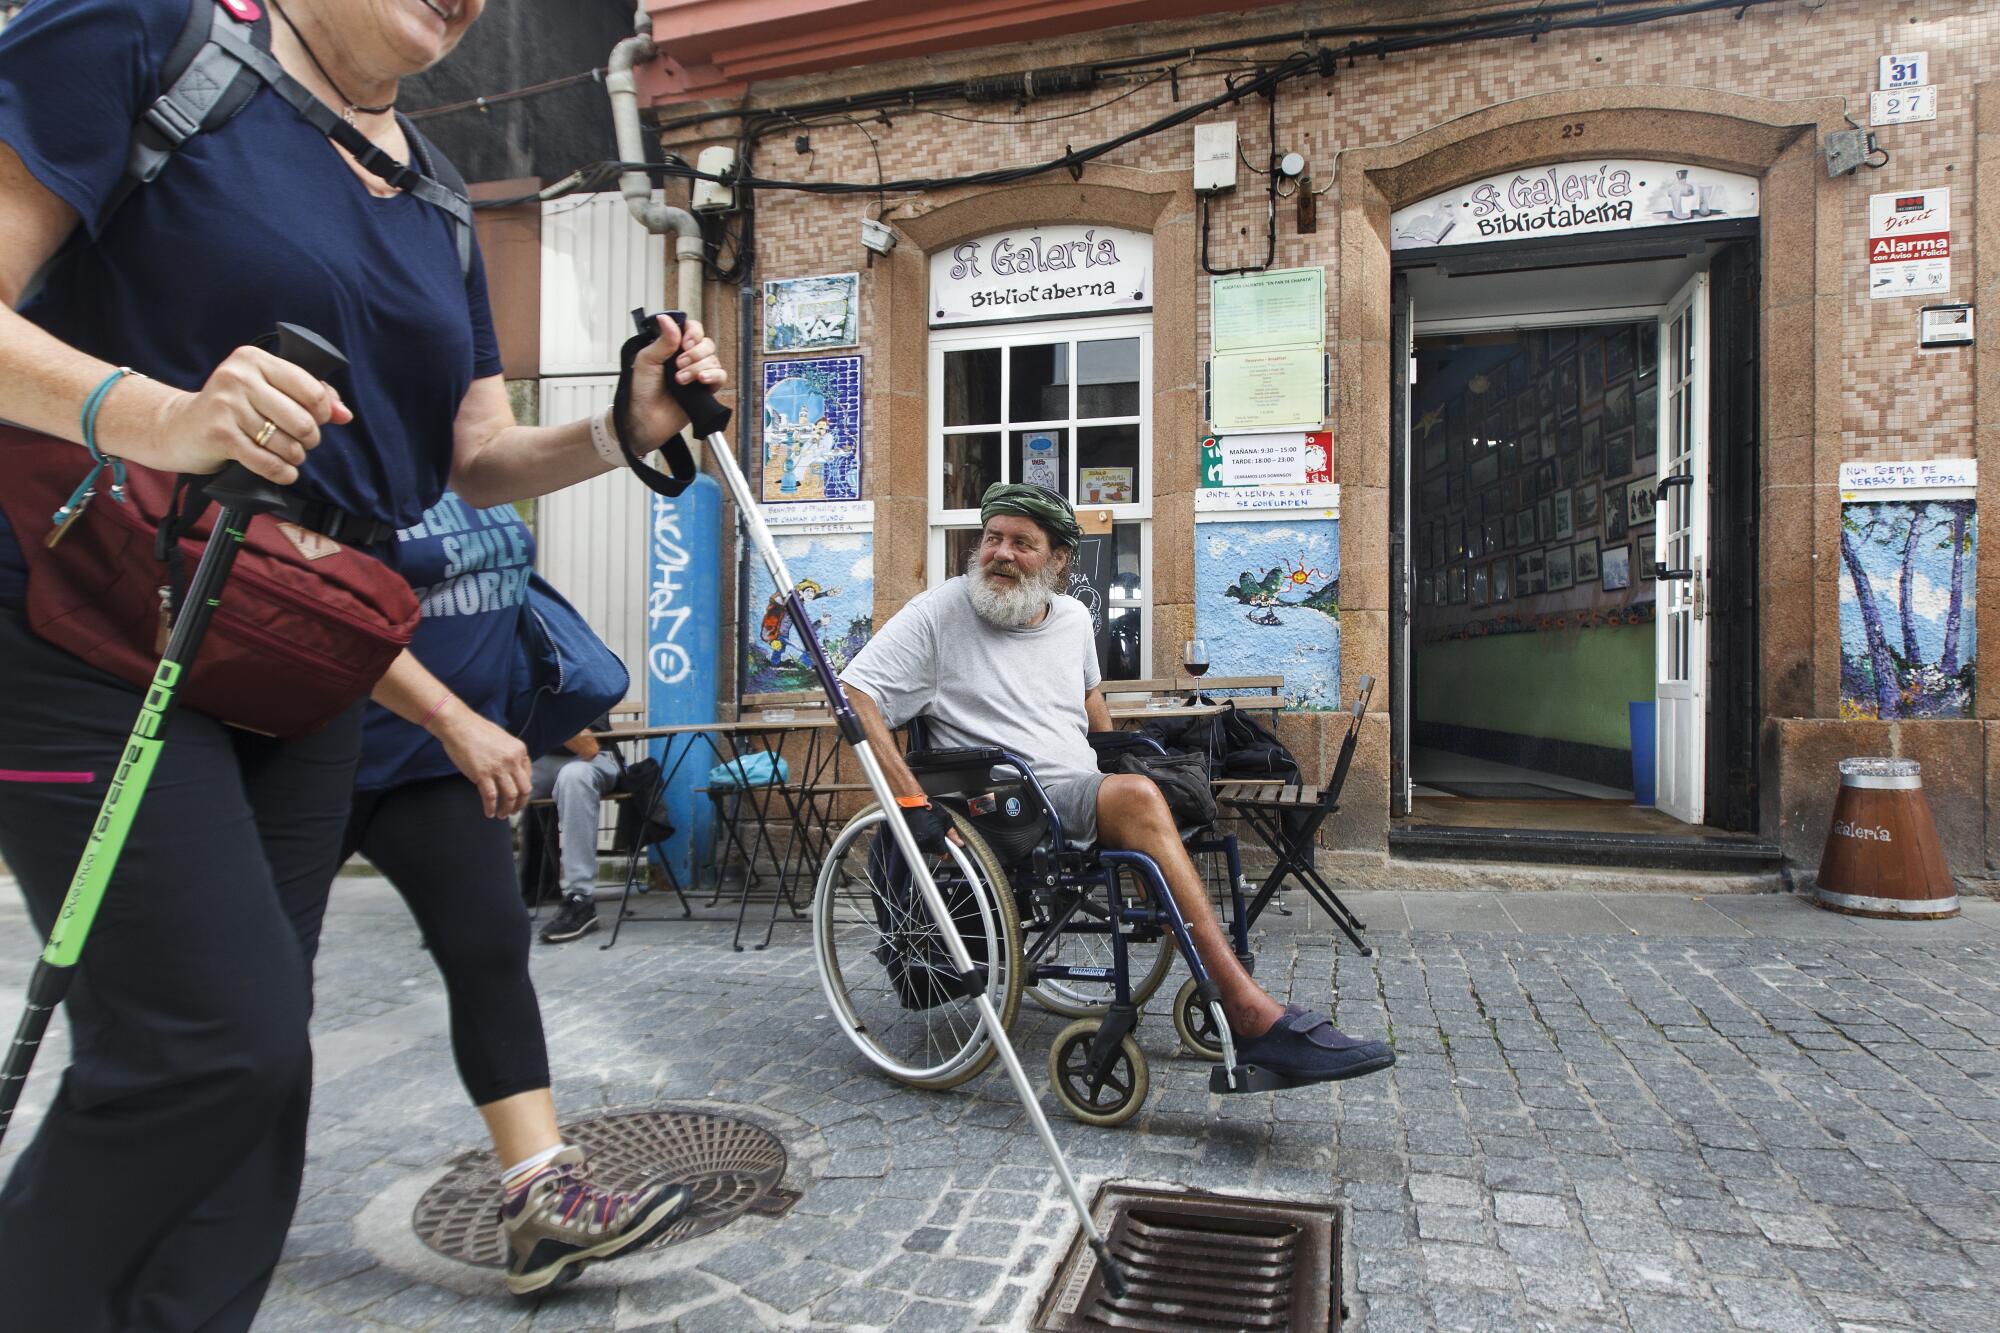 Pedro, a hippie originally from the south of Spain, in front of the bar A Galería. He has walked the Camino several times participated in the first each bonanza onMar de Fora. Now without a leg, he spends long stretches in Fisterra.